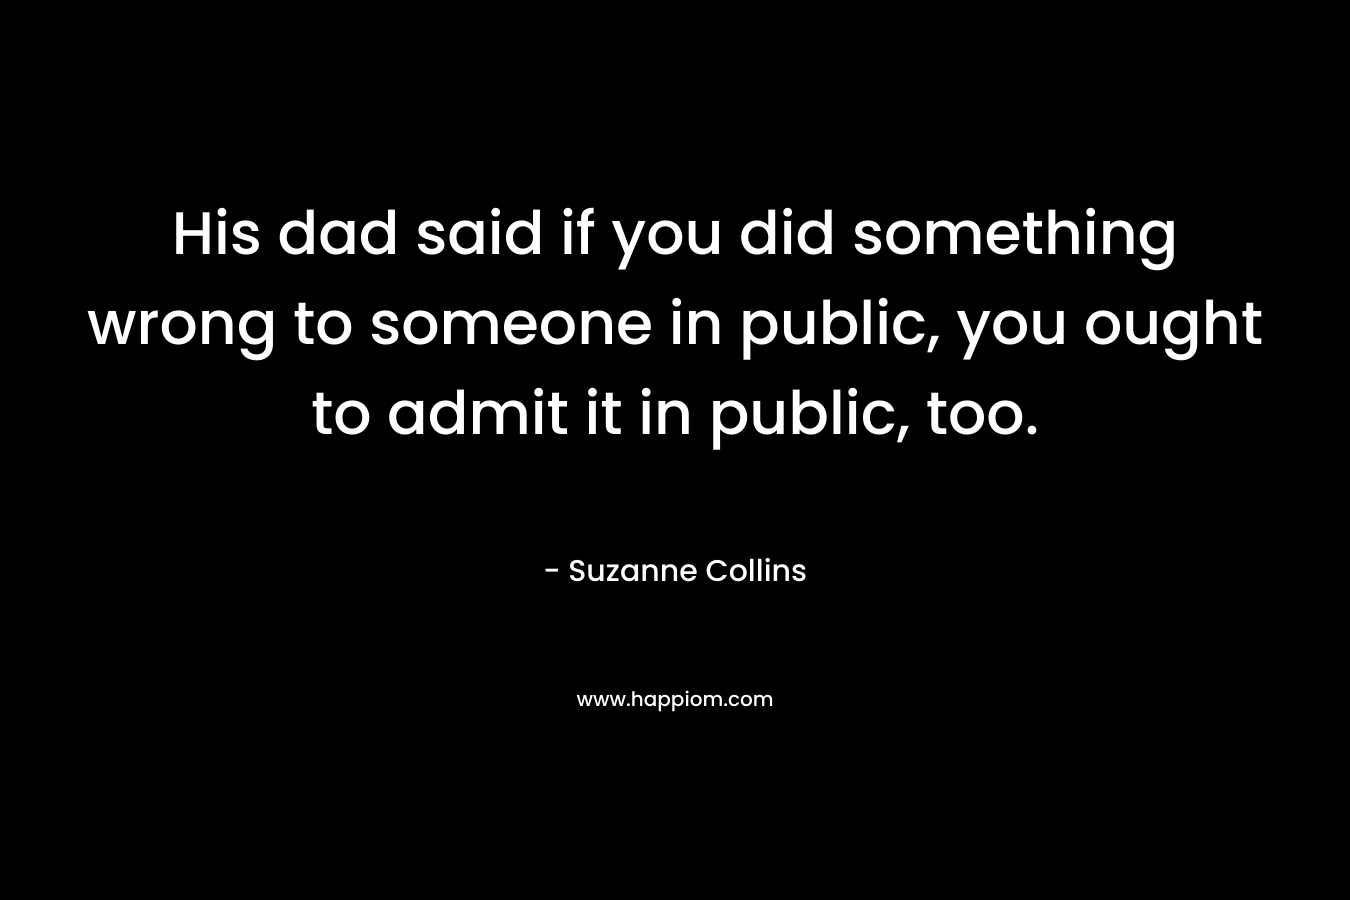 His dad said if you did something wrong to someone in public, you ought to admit it in public, too.